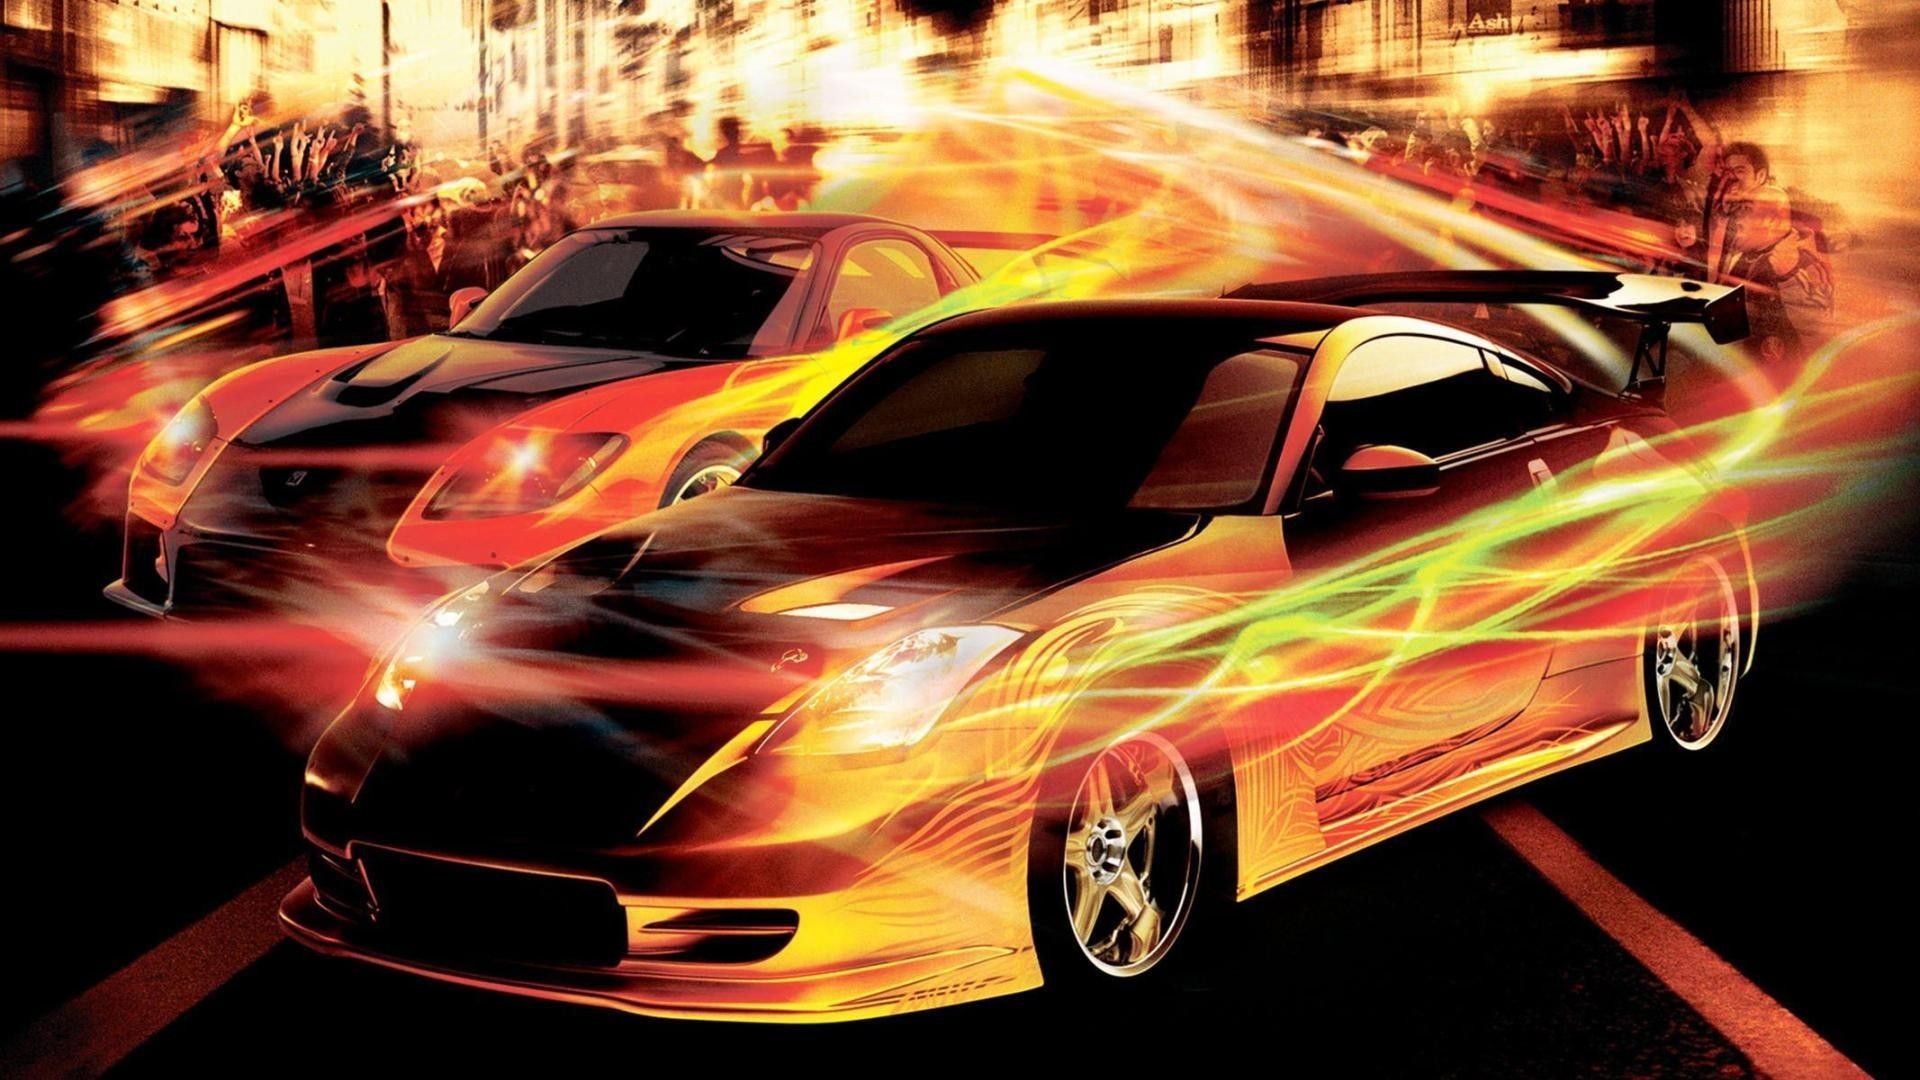 The Fast and the Furious: Tokyo Drift background